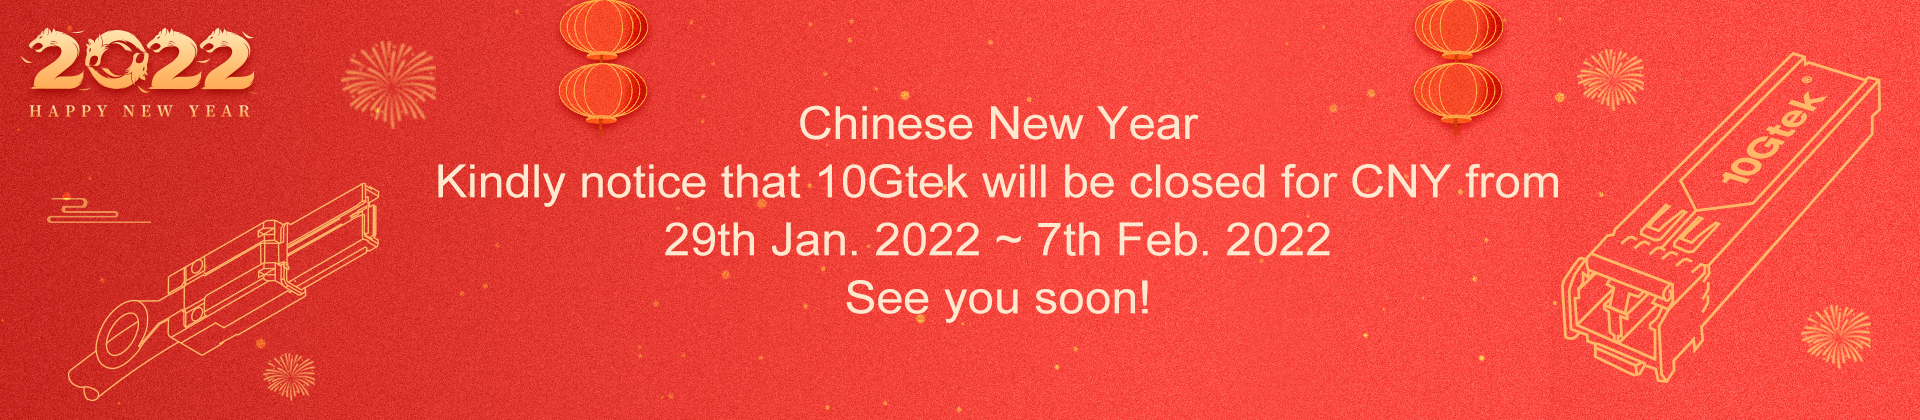 10Gtek Chinese New Year Festival holiday notice 2022